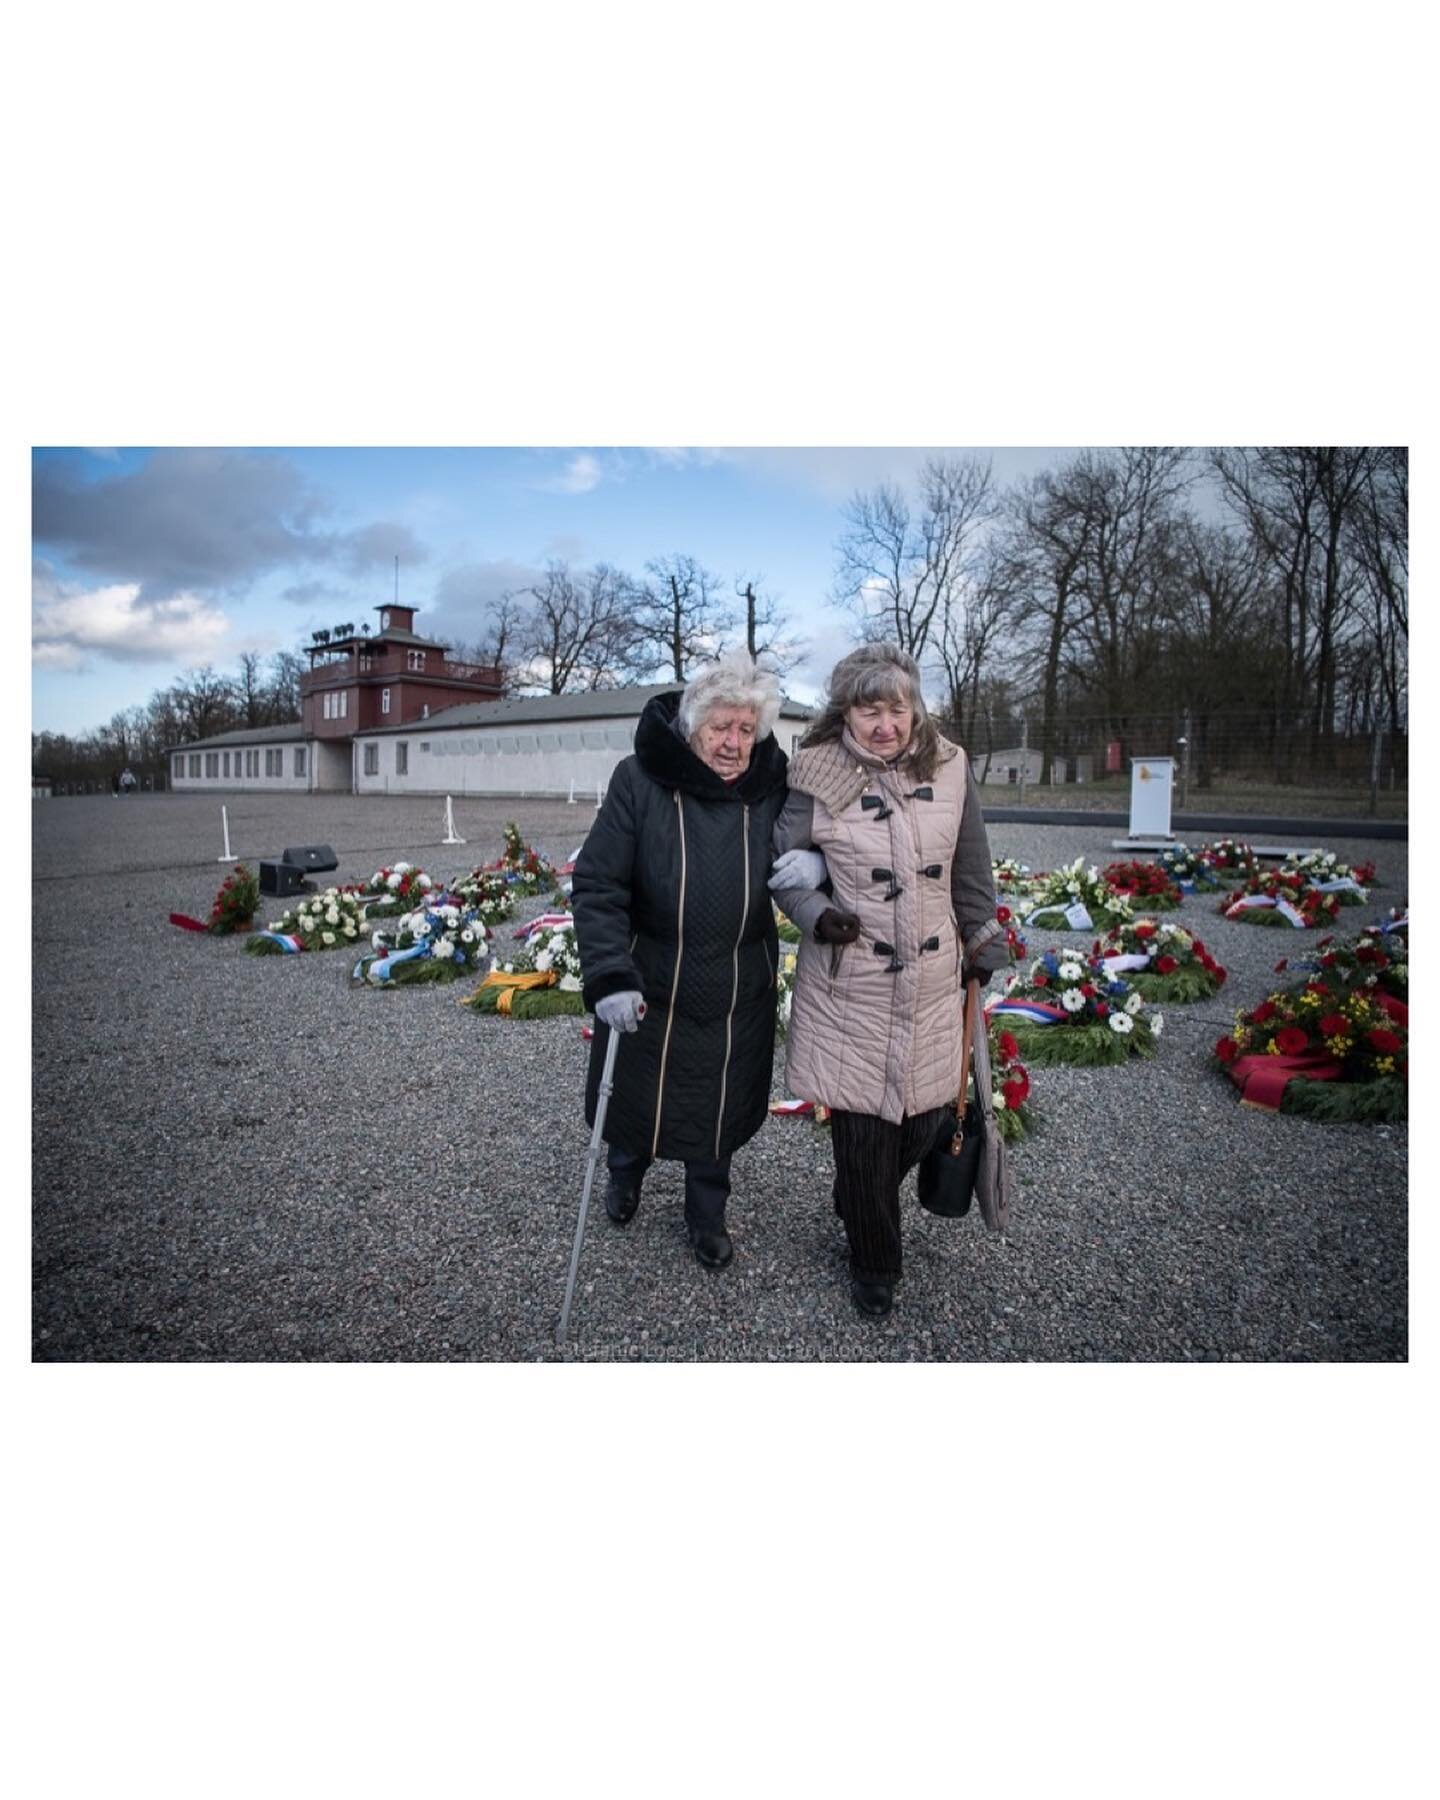 One of the most moving assignments this year. On the day of liberation, survivors visit the Buchenwald concentration camp near Weimar.
.
A wreath laying ceremony marking the 77th anniversary of the liberation of the Nazi concentration camp Buchenwald